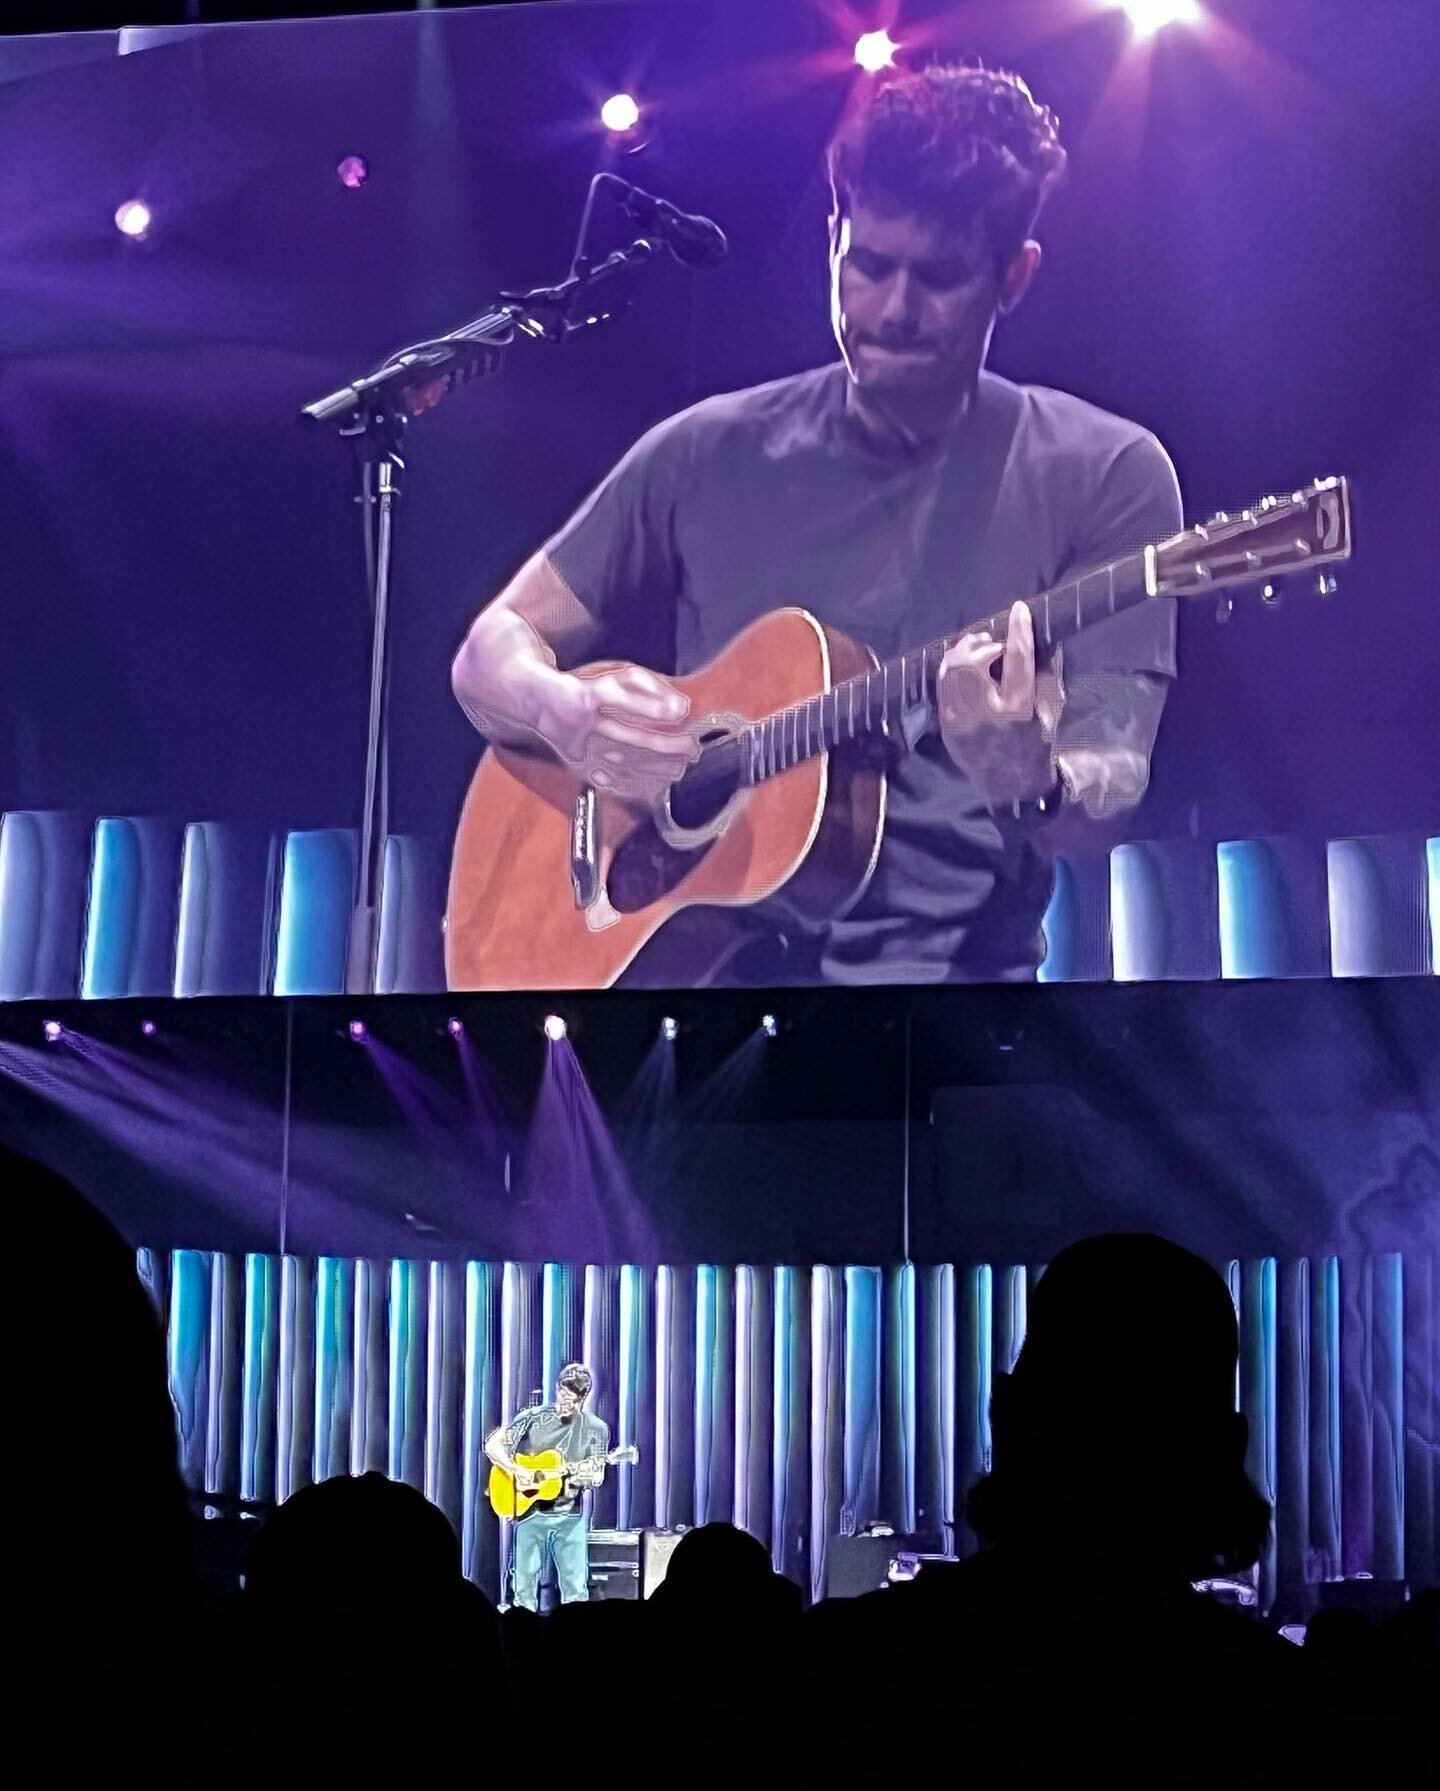 I am not a musician, but I am always moved by how an artist can connect with the audience through the music. No one does it better, in my opinion, than this guy. Hands down, the best concert I have ever been to. Just @johnmayer and his guitar. There&